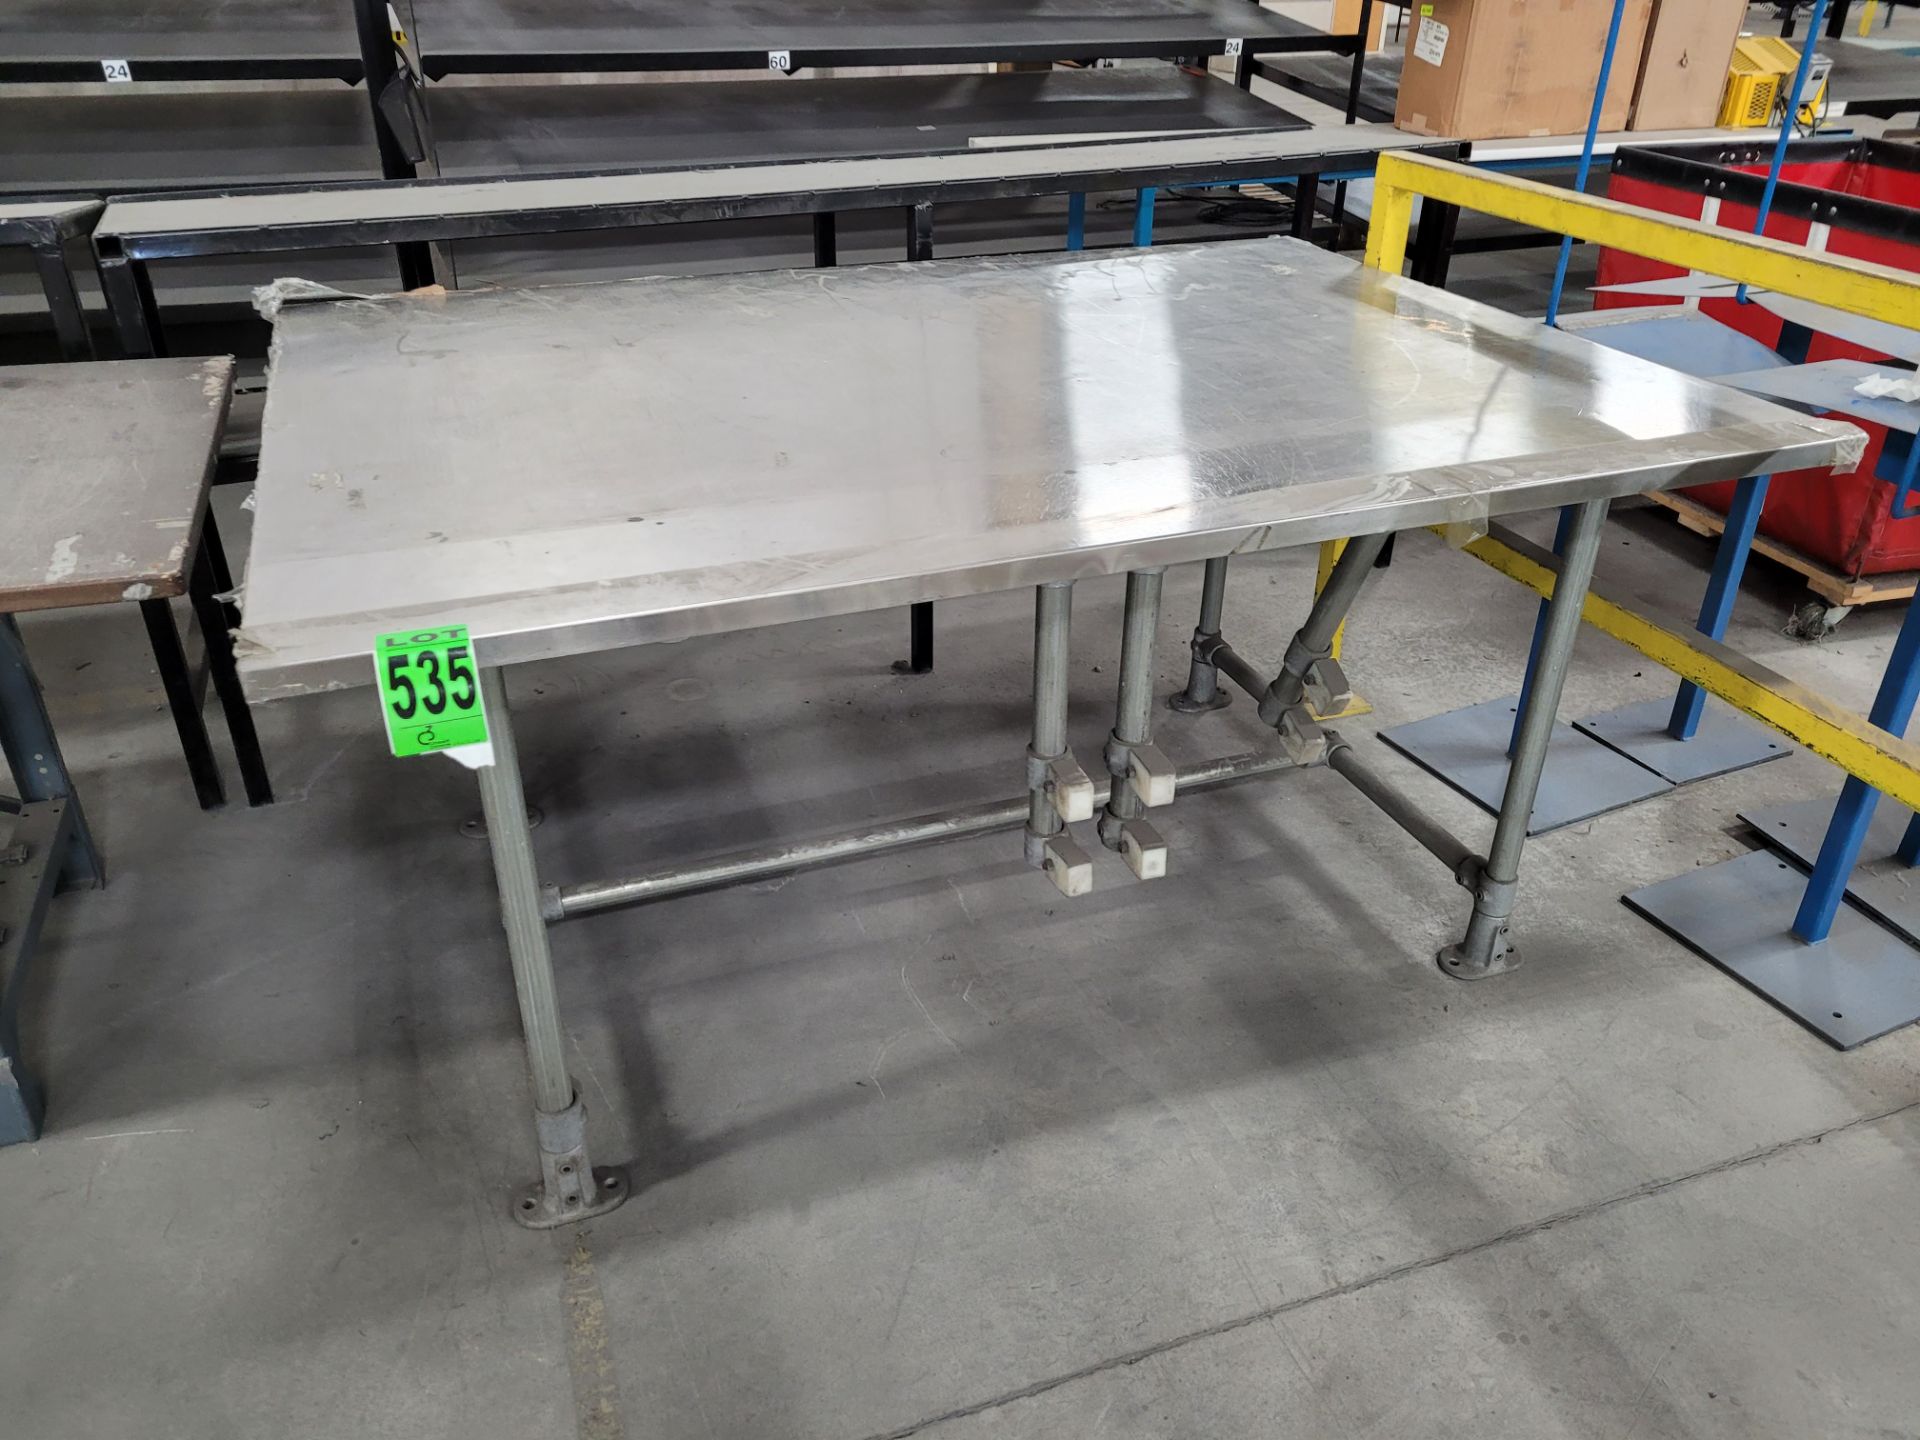 Stainless steel worksurface on steel frame w/ composite piece holders